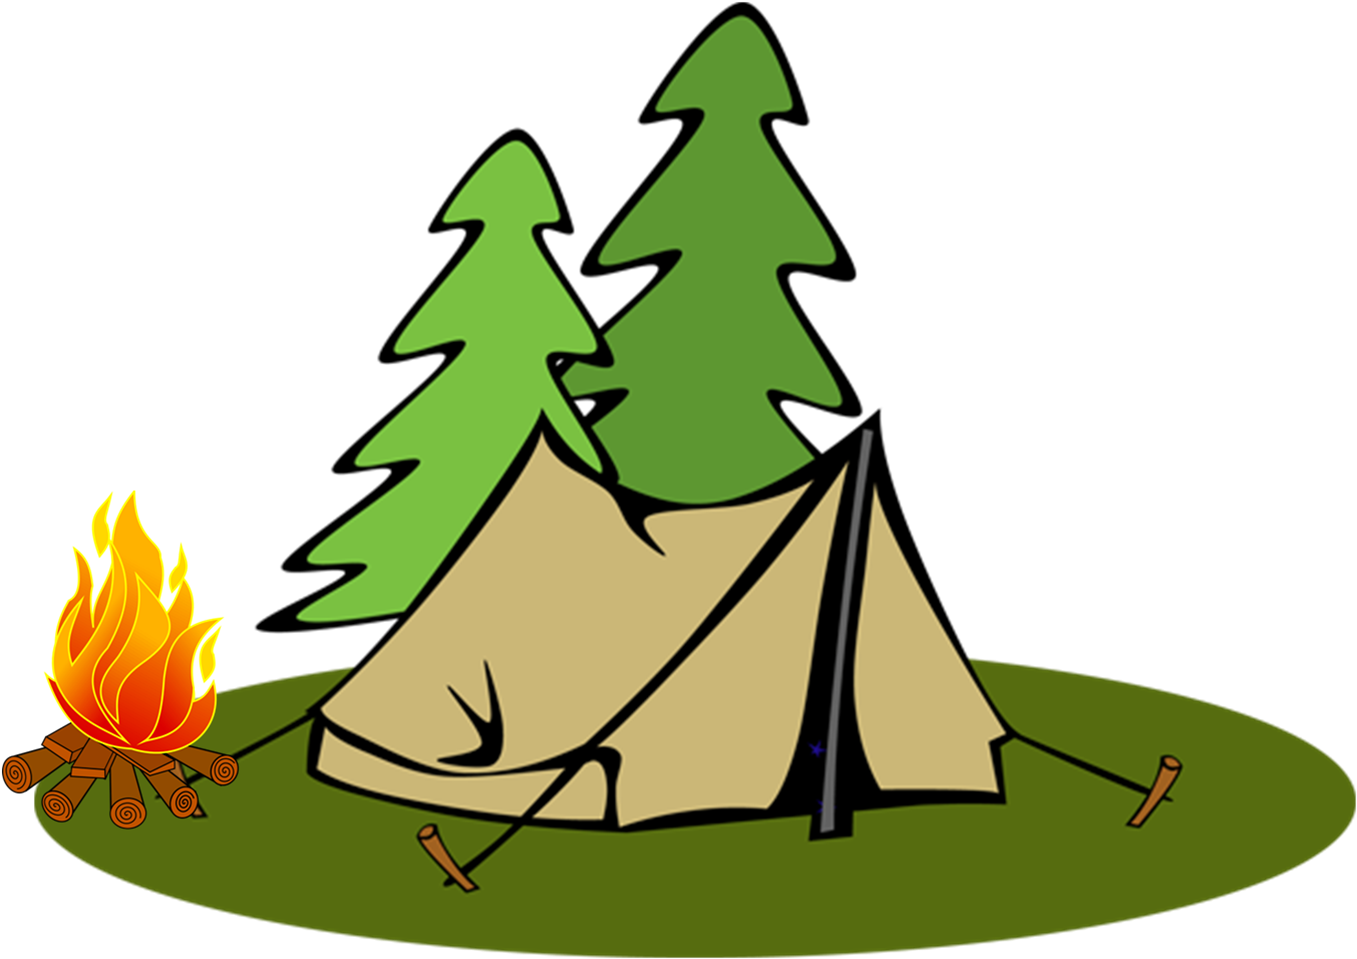 Campsite With Tent And Campfire Illustration PNG